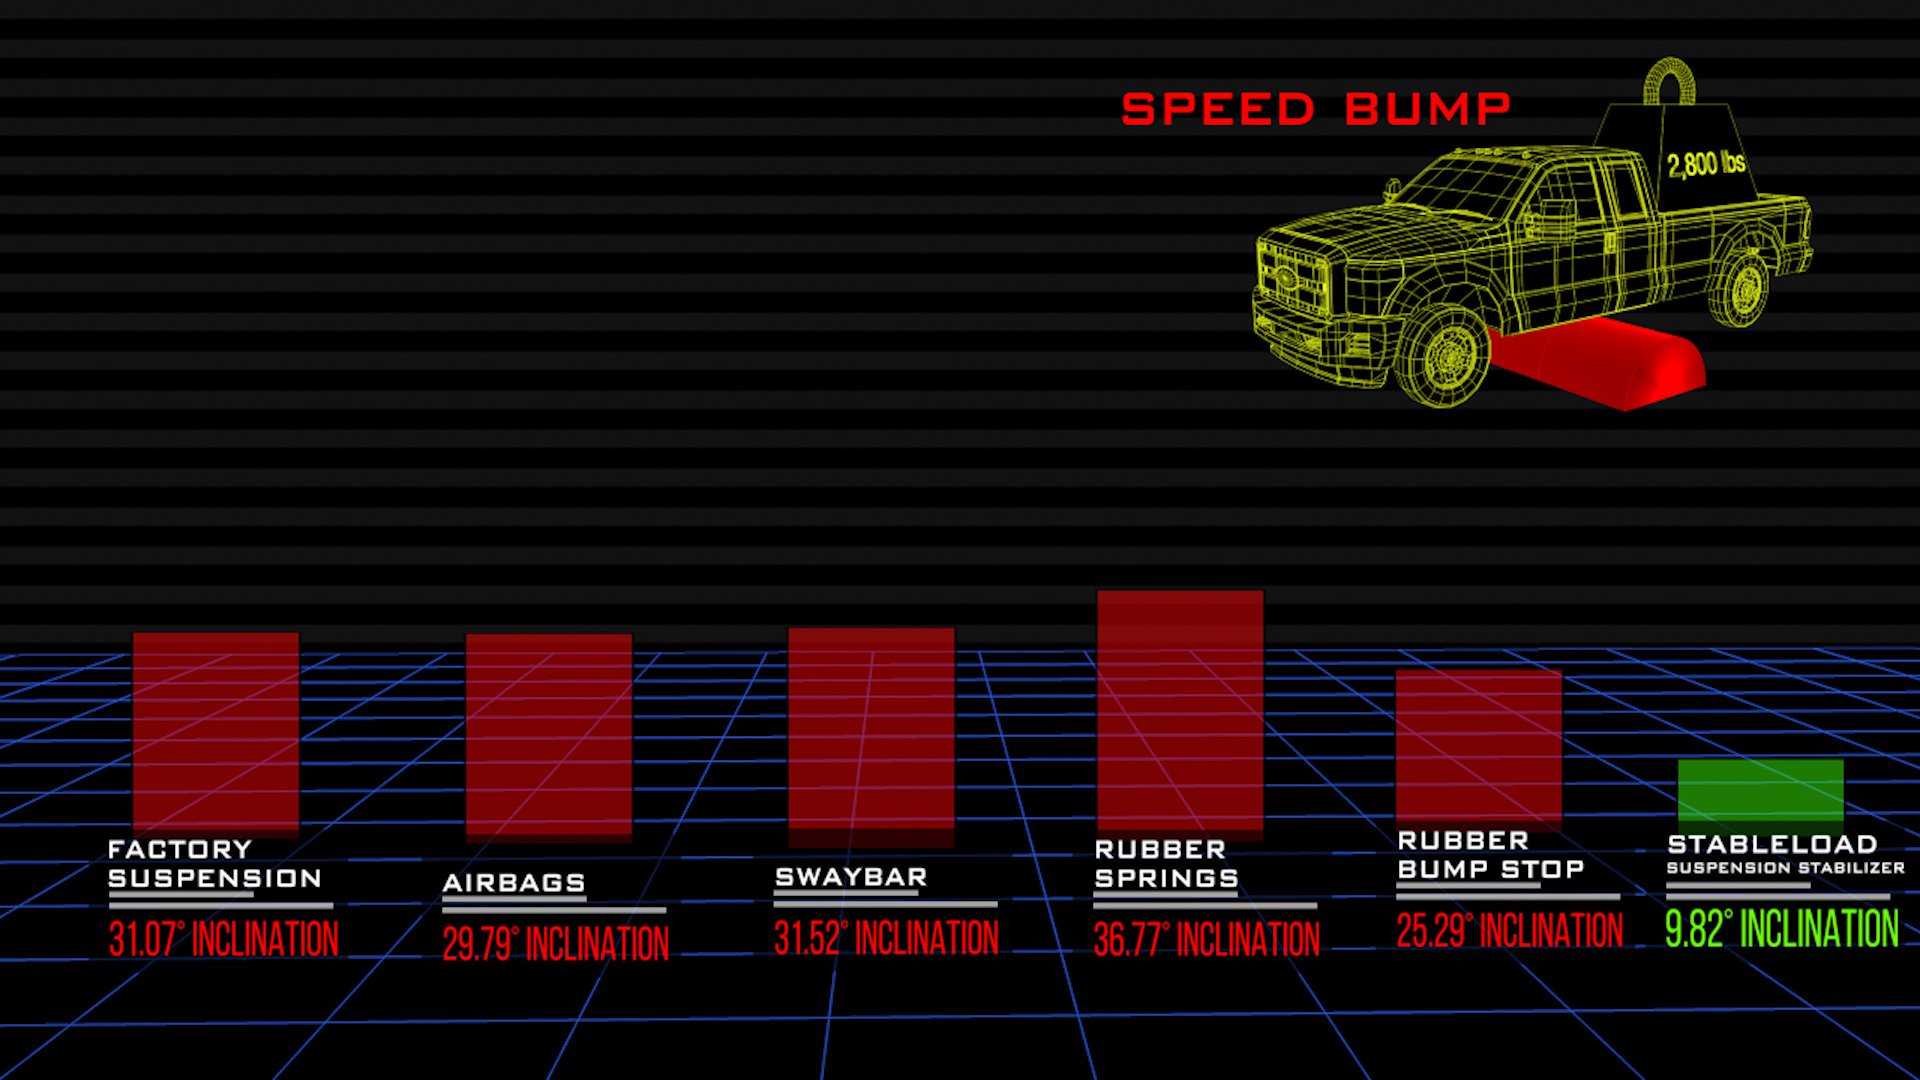 The Results from the Speed Bump Test